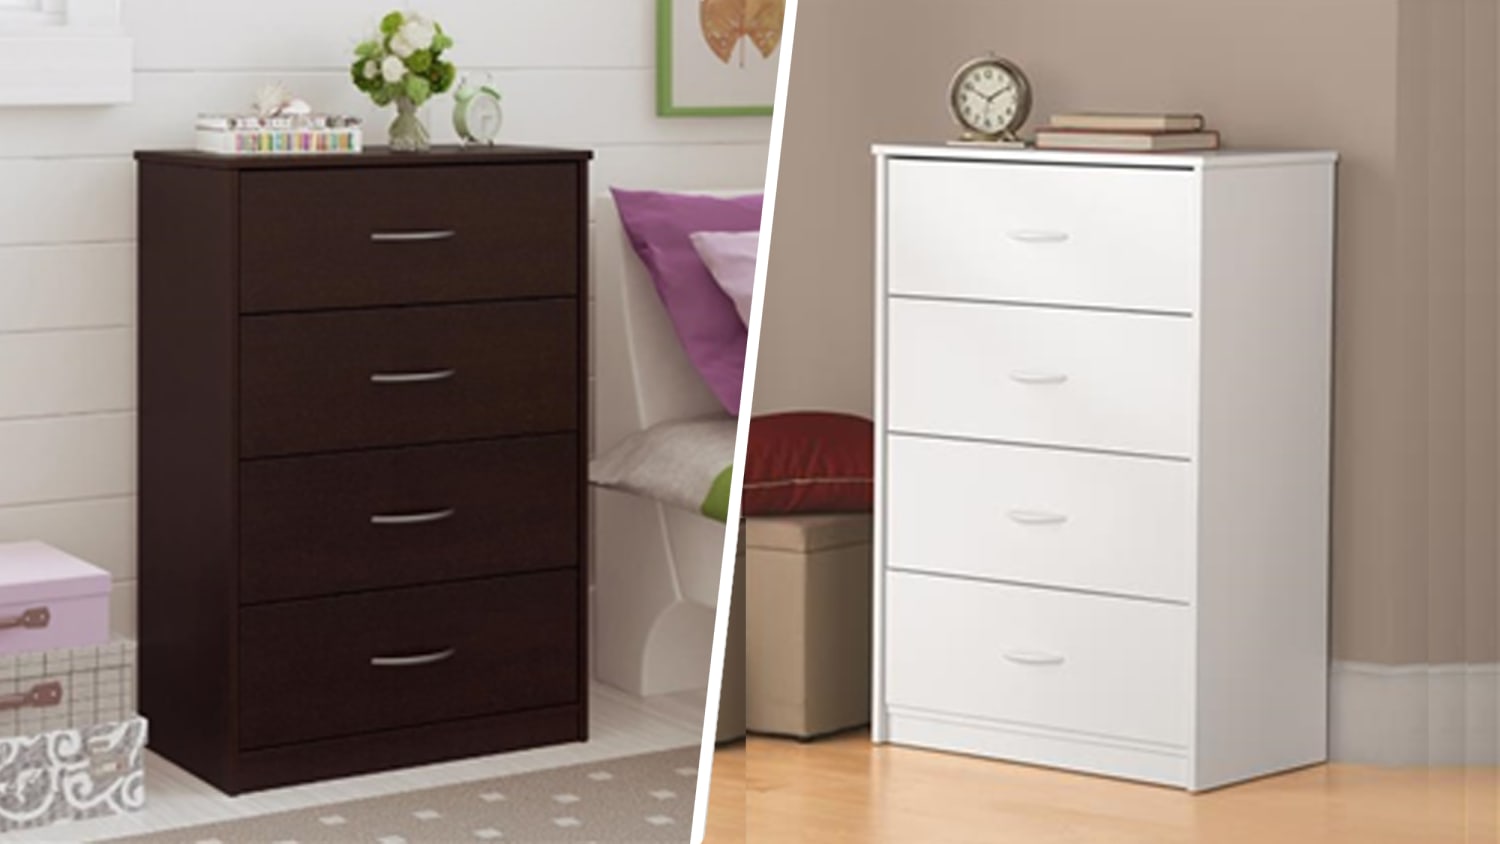 1 6 Million Dressers Sold Through Walmart Others Recalled Over